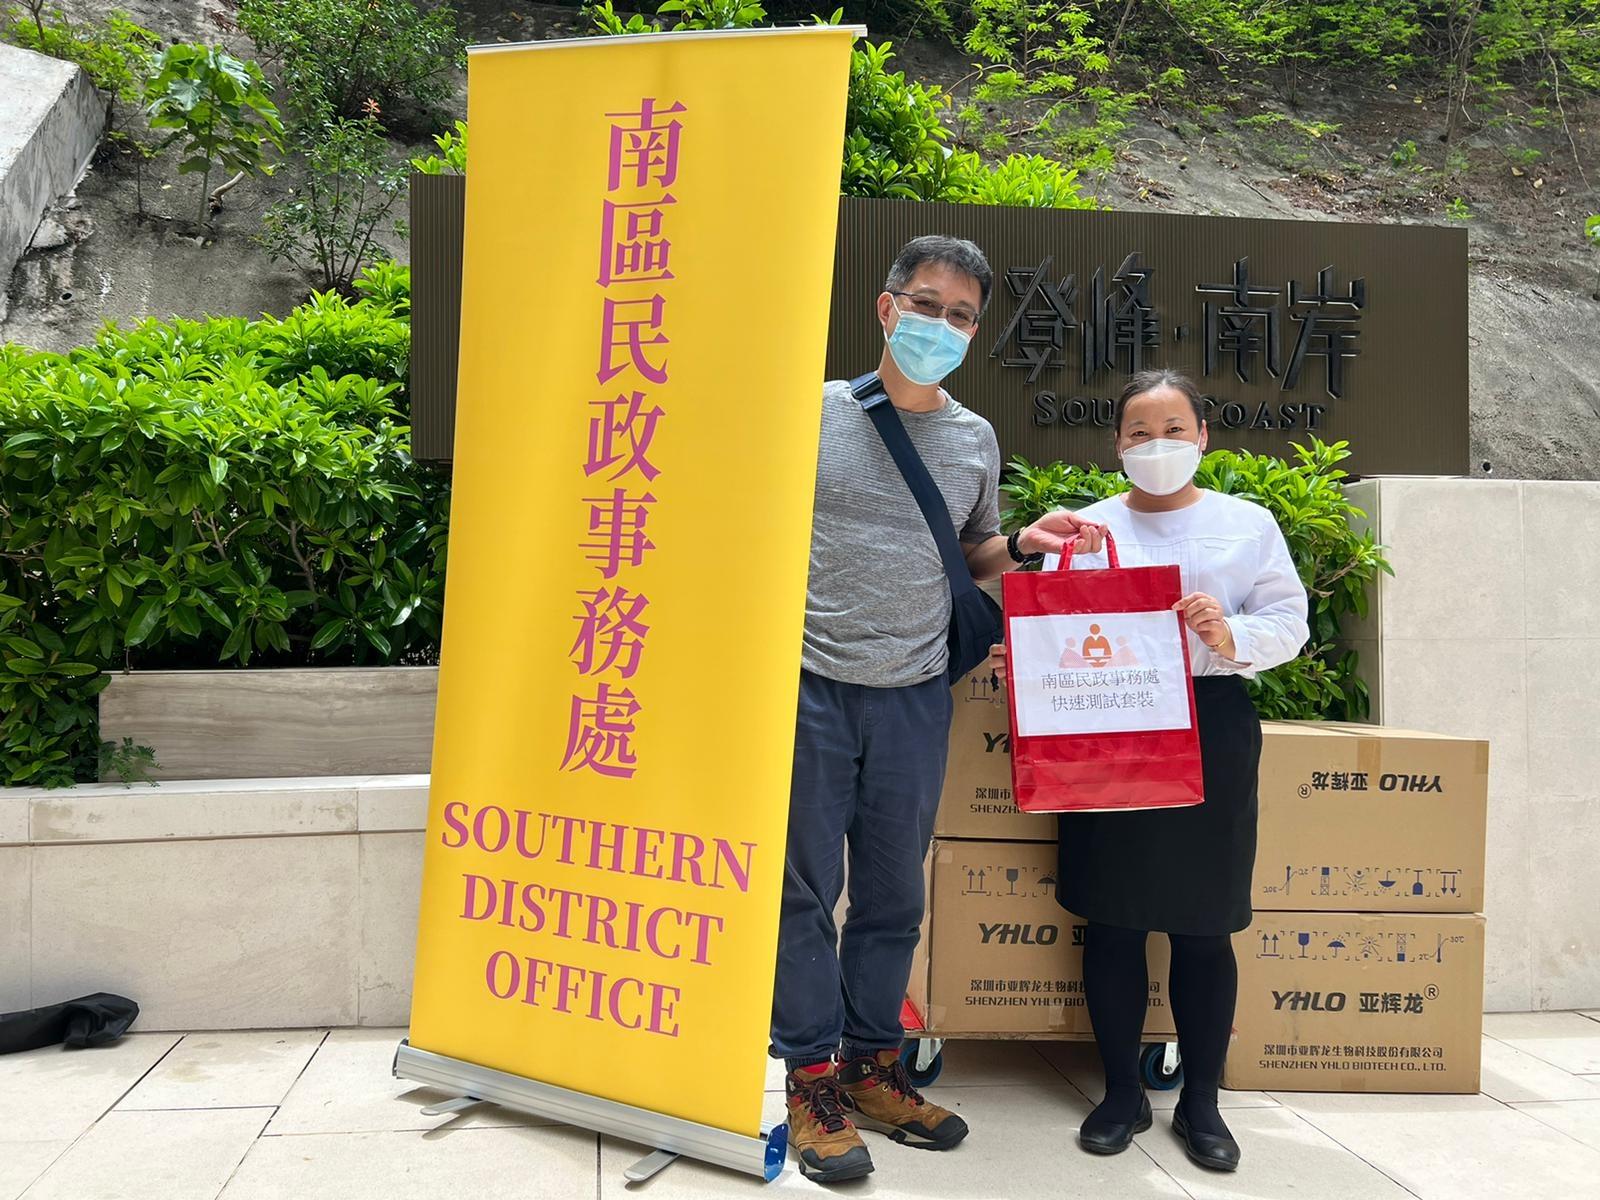 The Southern District Office today (June 1) distributed COVID-19 rapid test kits to households, cleansing workers and property management staff living and working in residential premises around Tang Fung Street for voluntary testing through the property management companies.